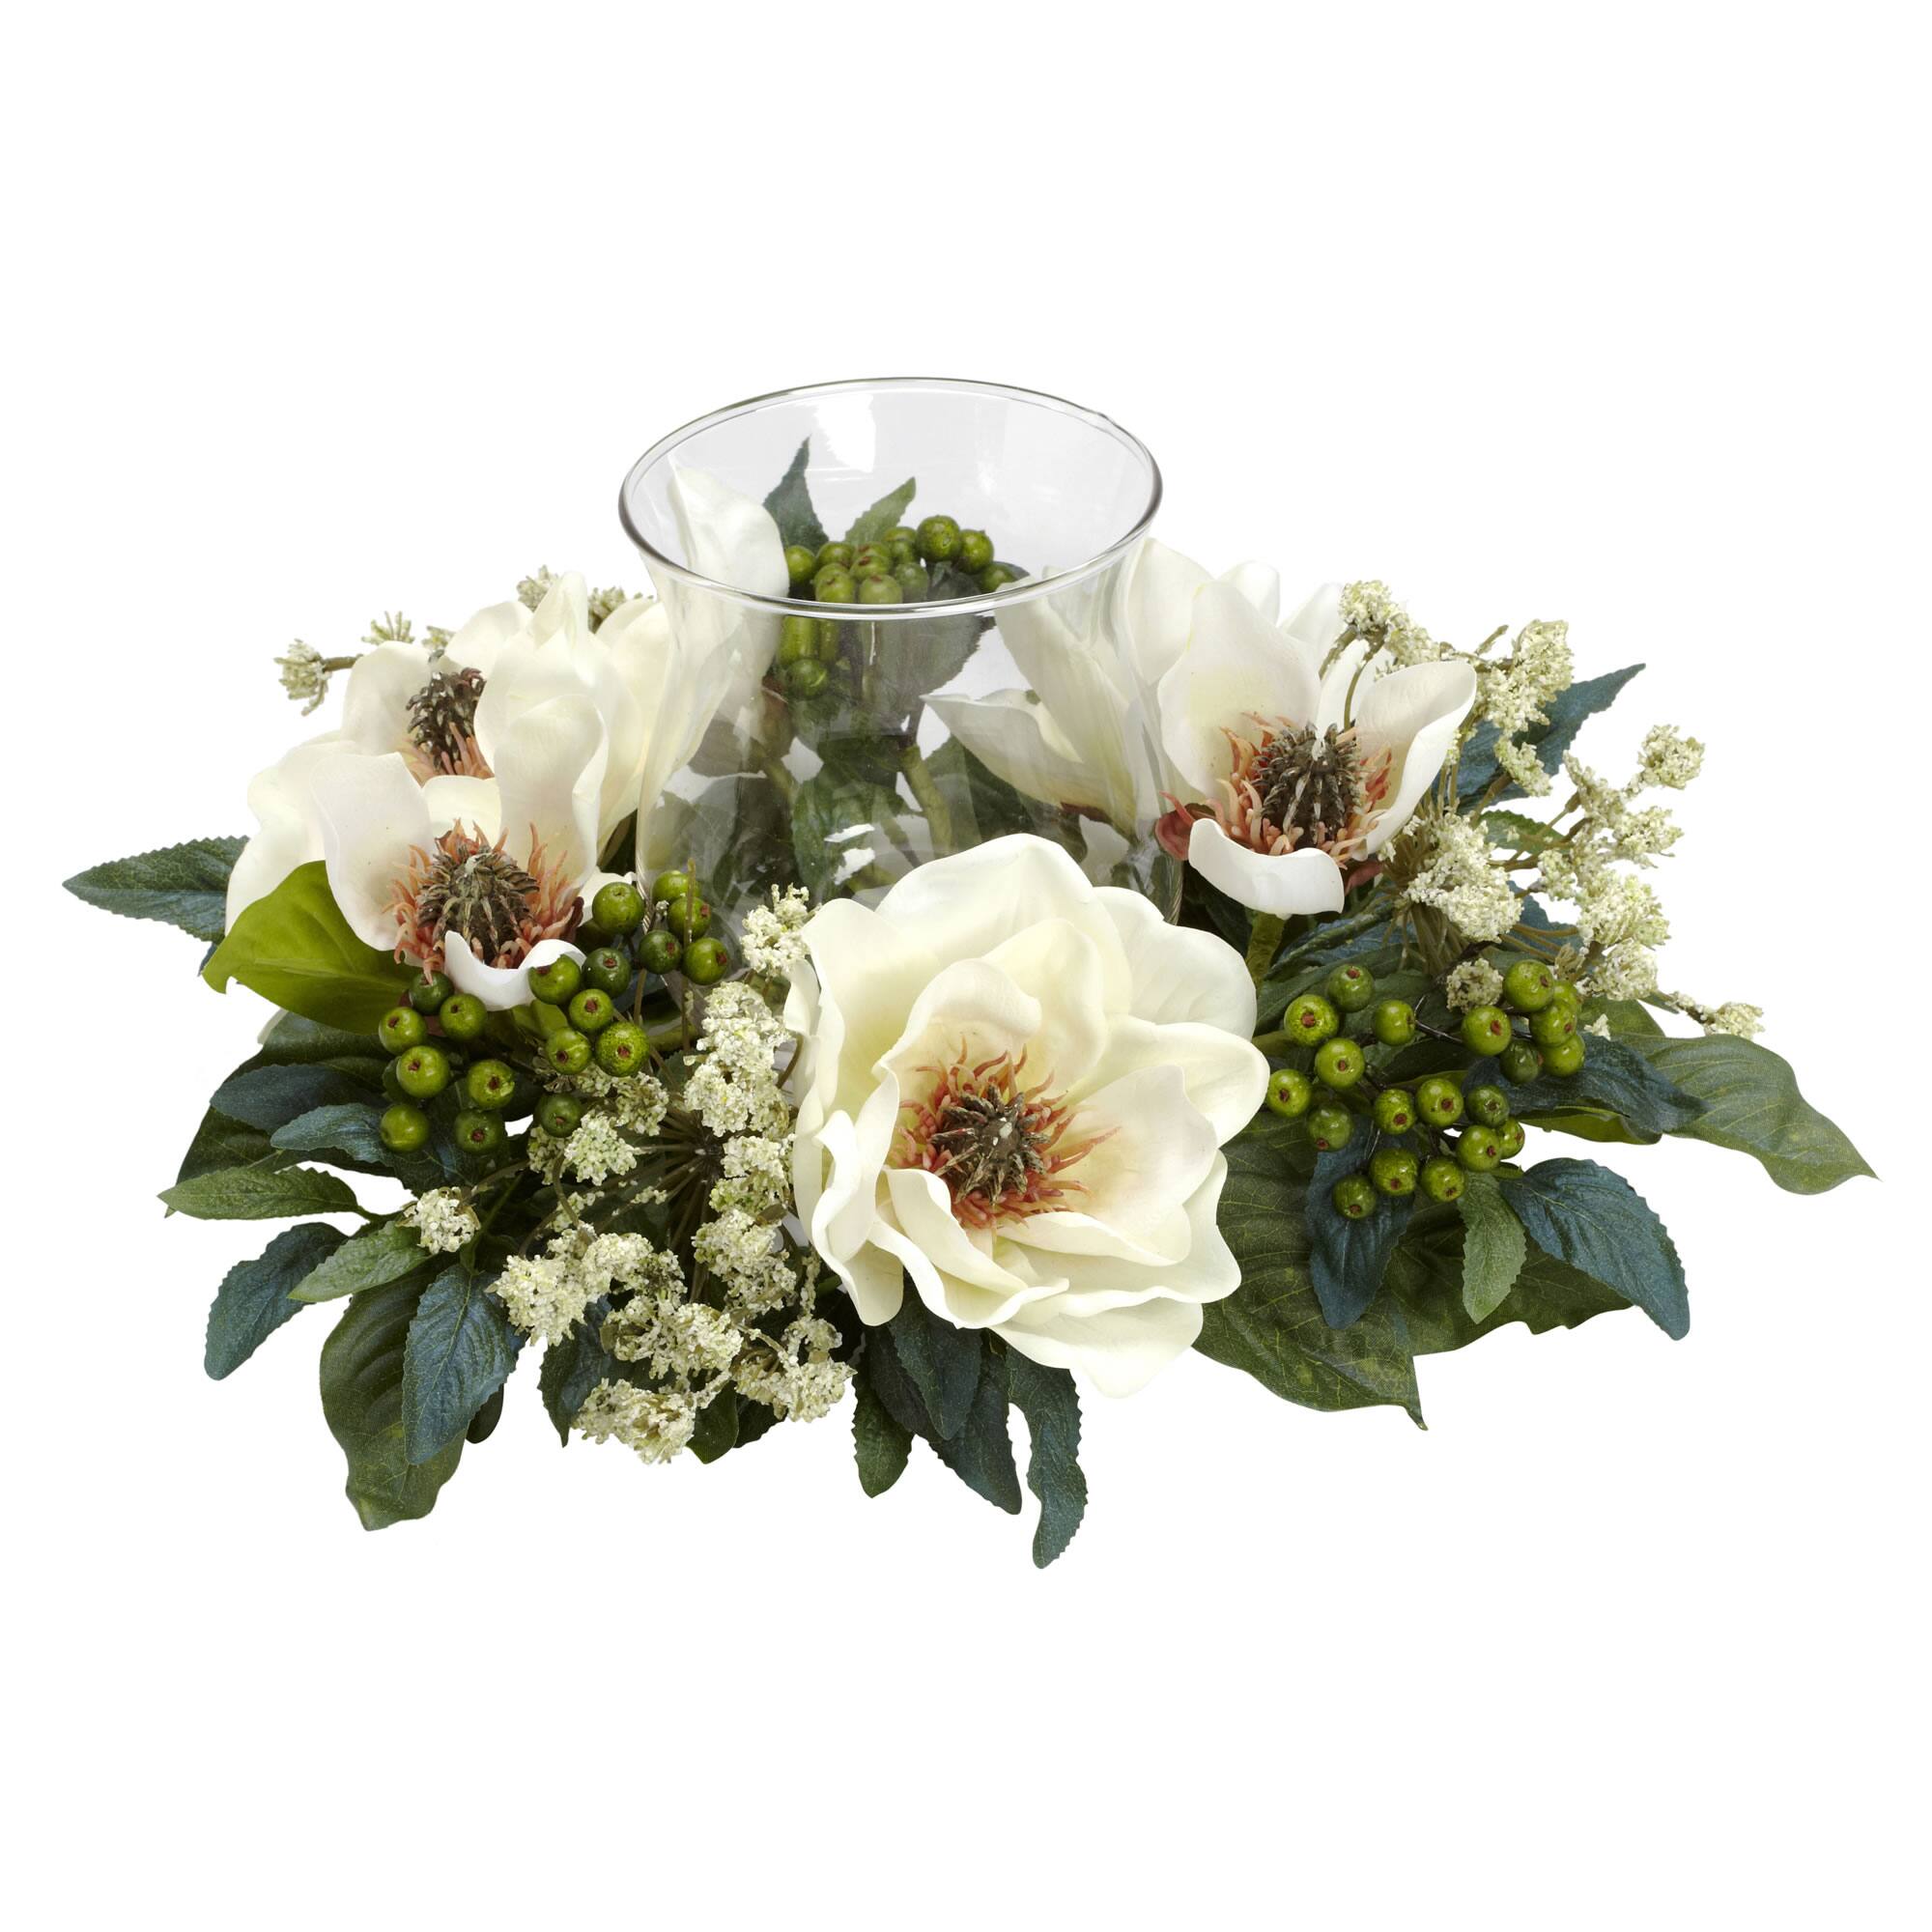 Multi-Colored Floral Arrangement in White Metal Pitcher Silicone